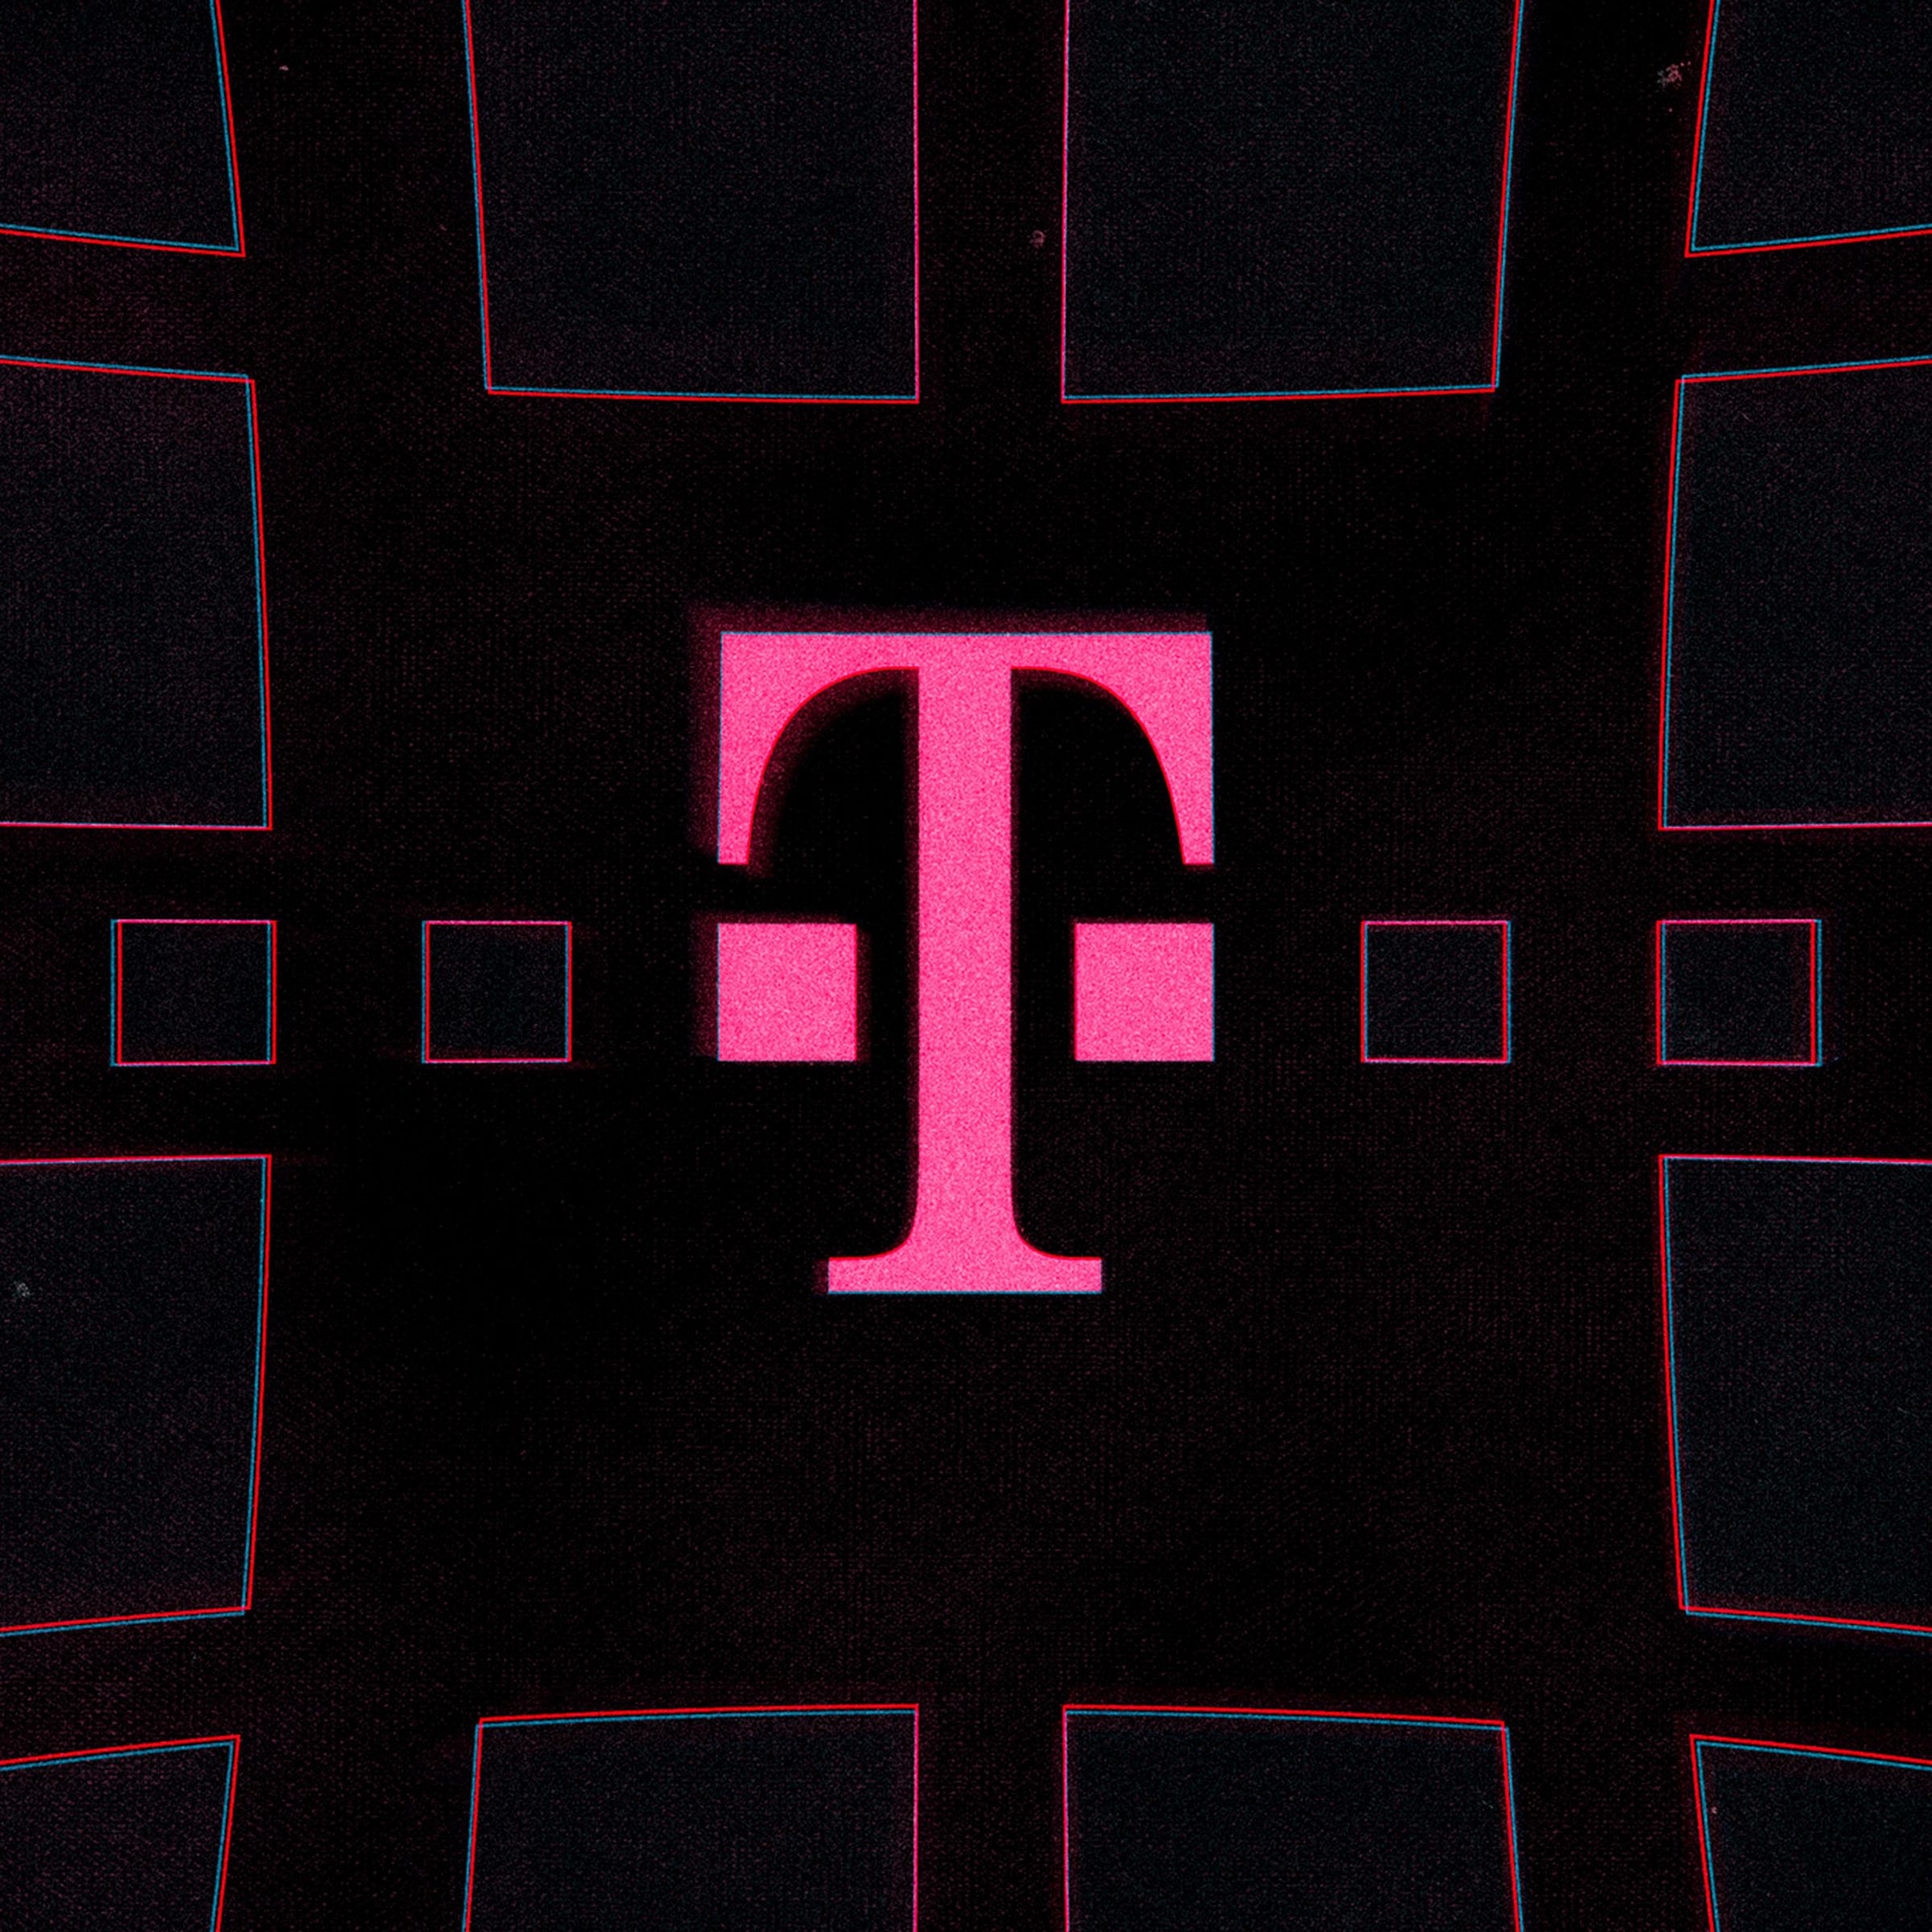 An illustration of T-Mobile’s magenta “T” logo on a black field with color-matched graphical squares.